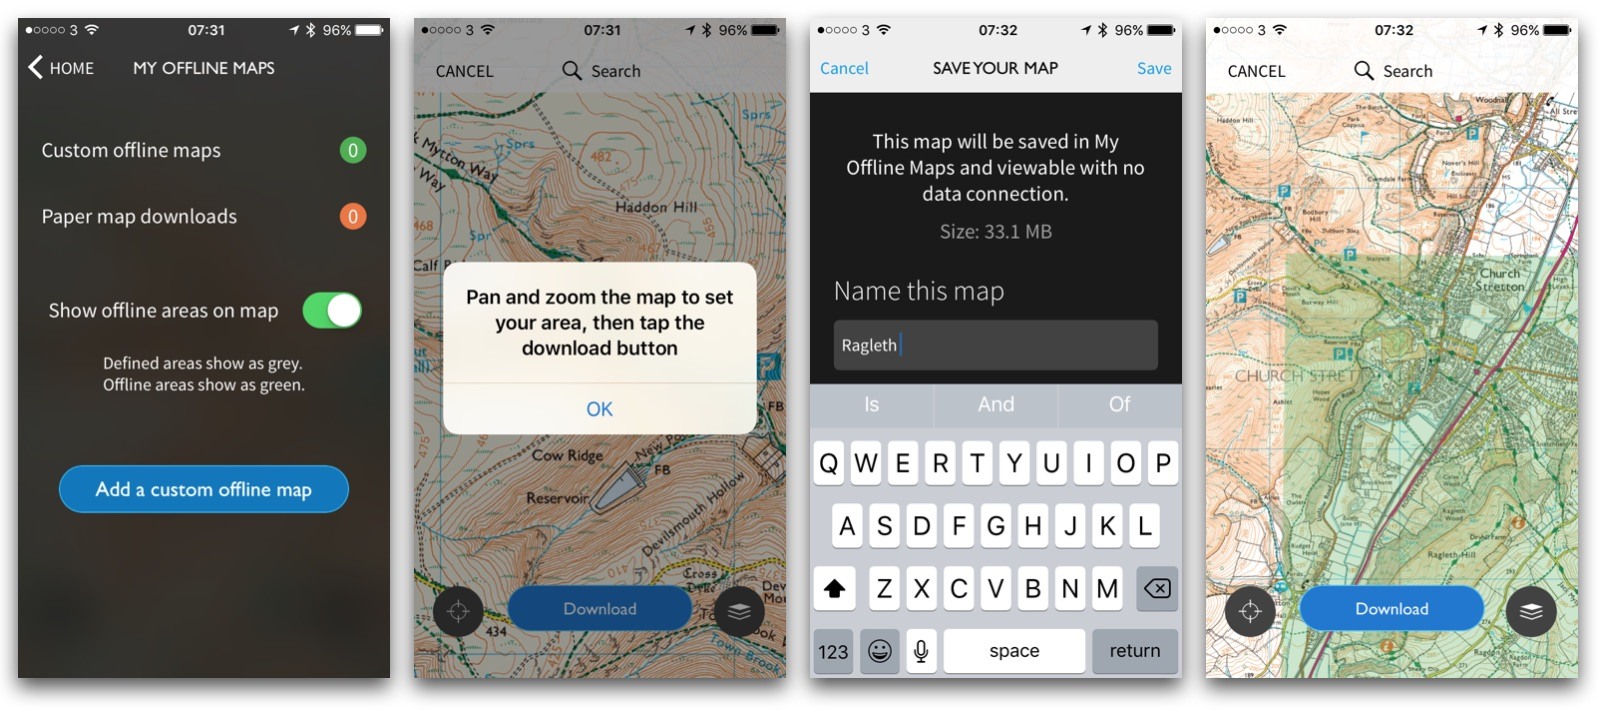 Saving offline maps in the OS Maps App